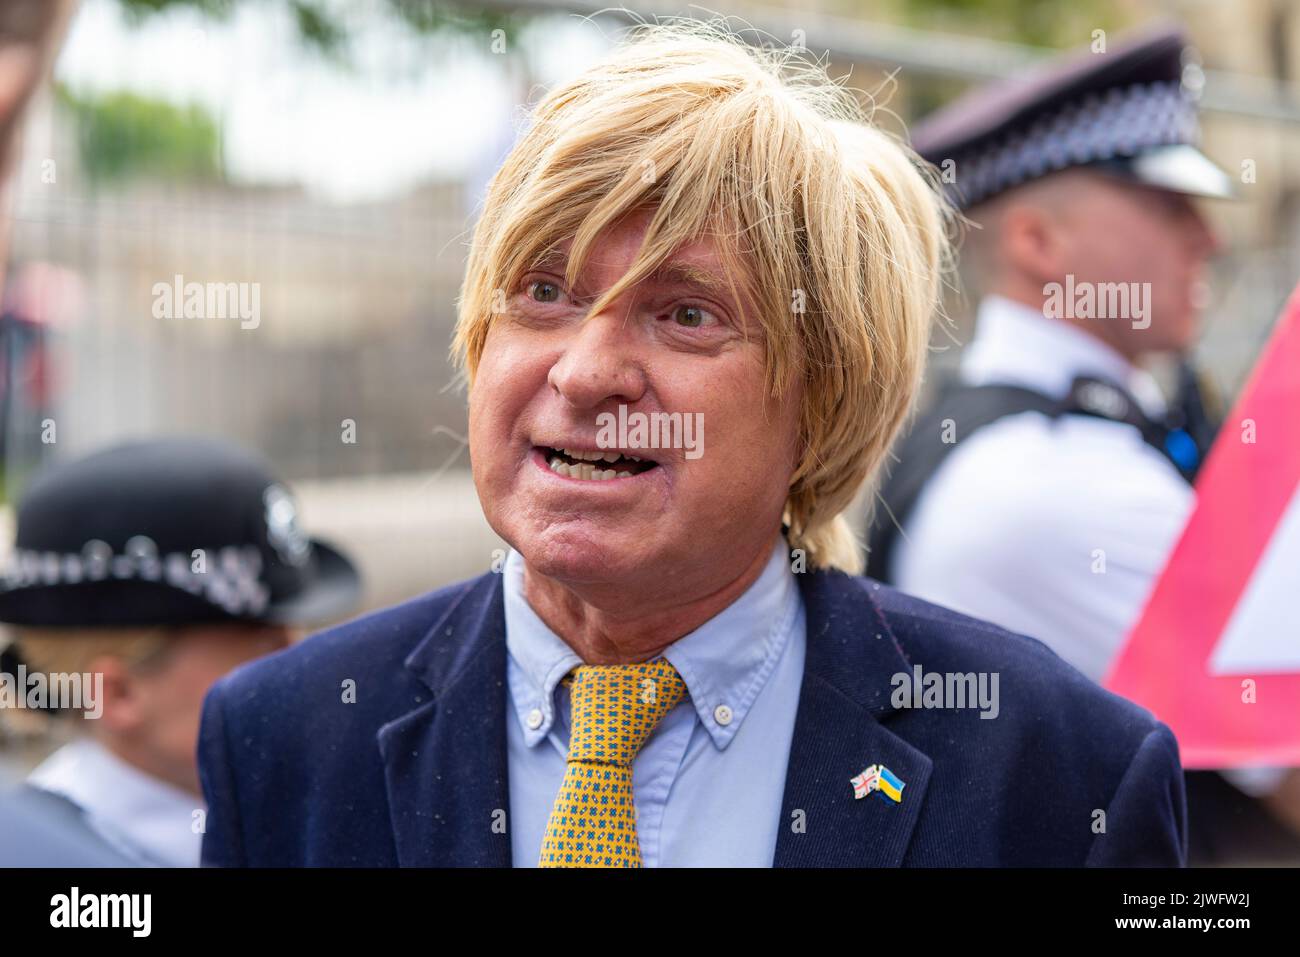 Michael Fabricant MP at the Queen Elizabeth II Centre for the Conservative party leadership announcement, London, UK. Stock Photo